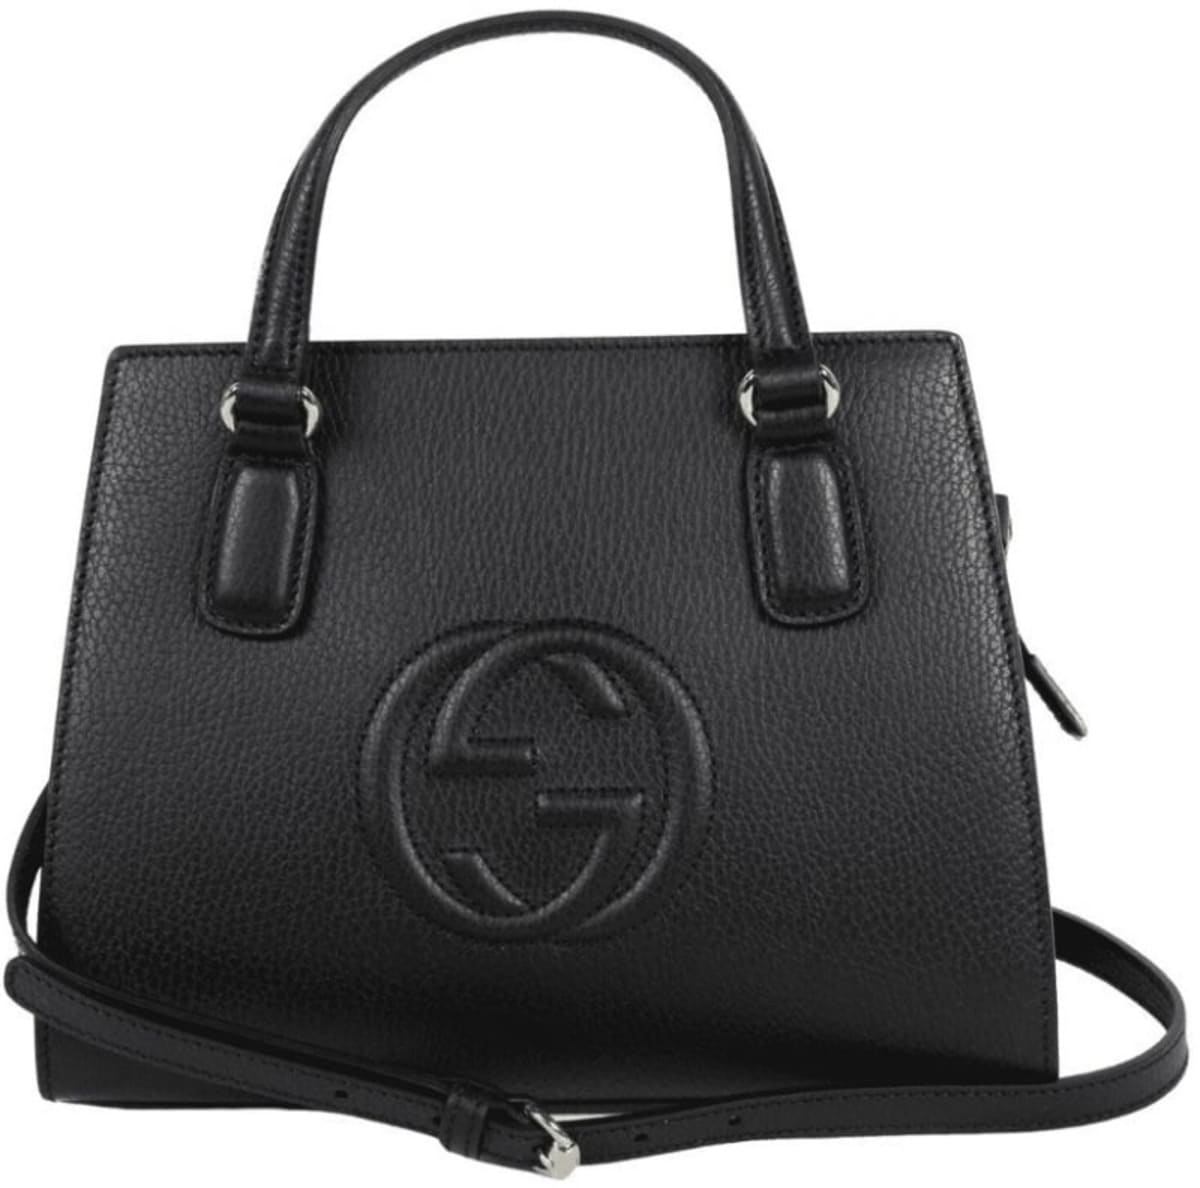 Gucci Soho Black Leather Small Women's Tote Bag 607722 CAO0G 1000